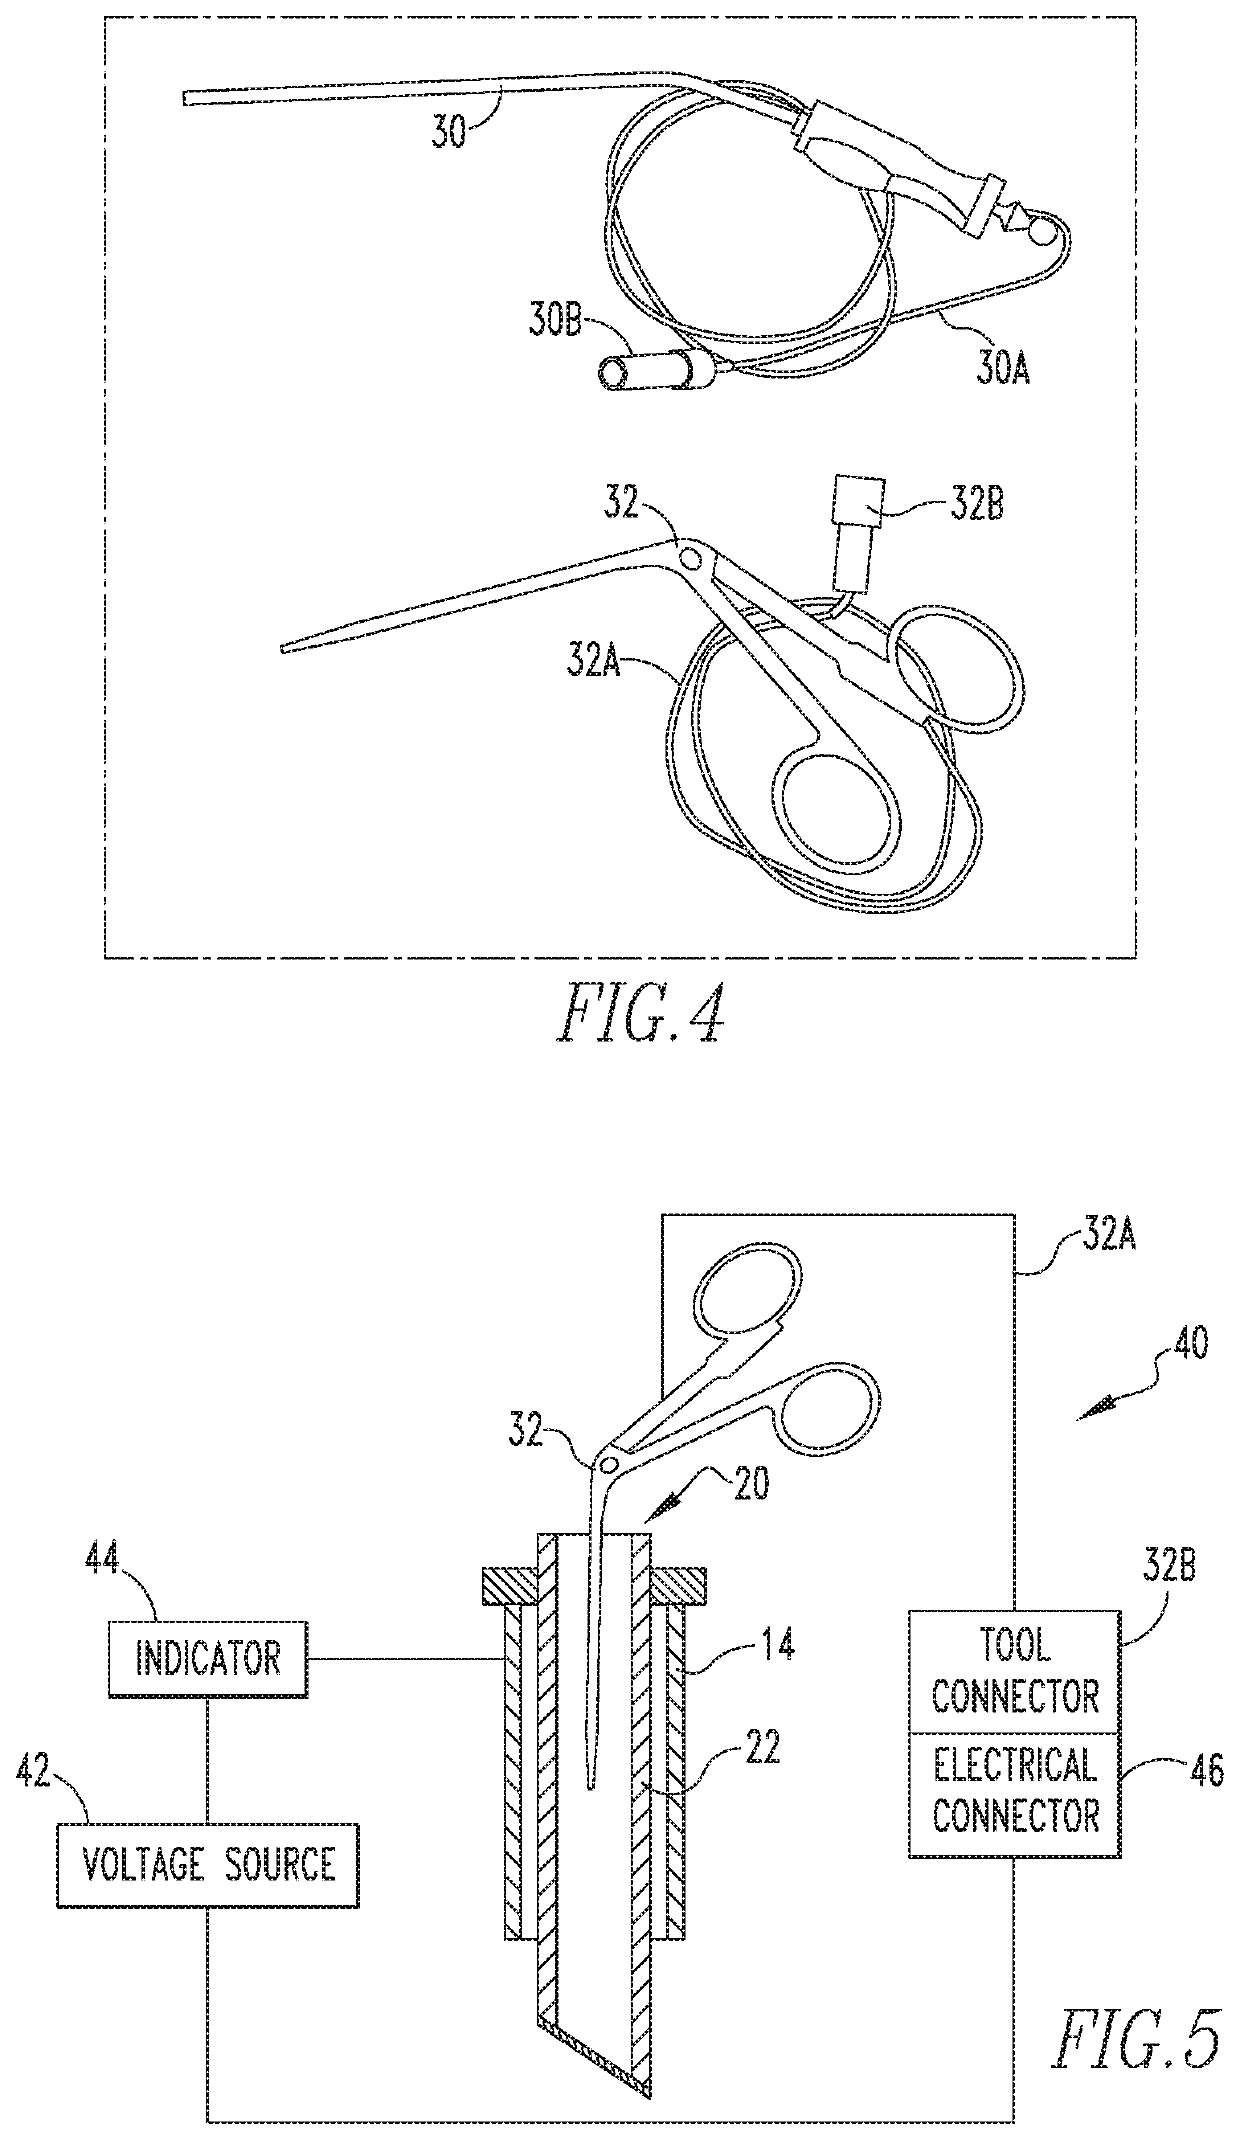 Myringotomy surgical training device with real-time and stored feedback on performance